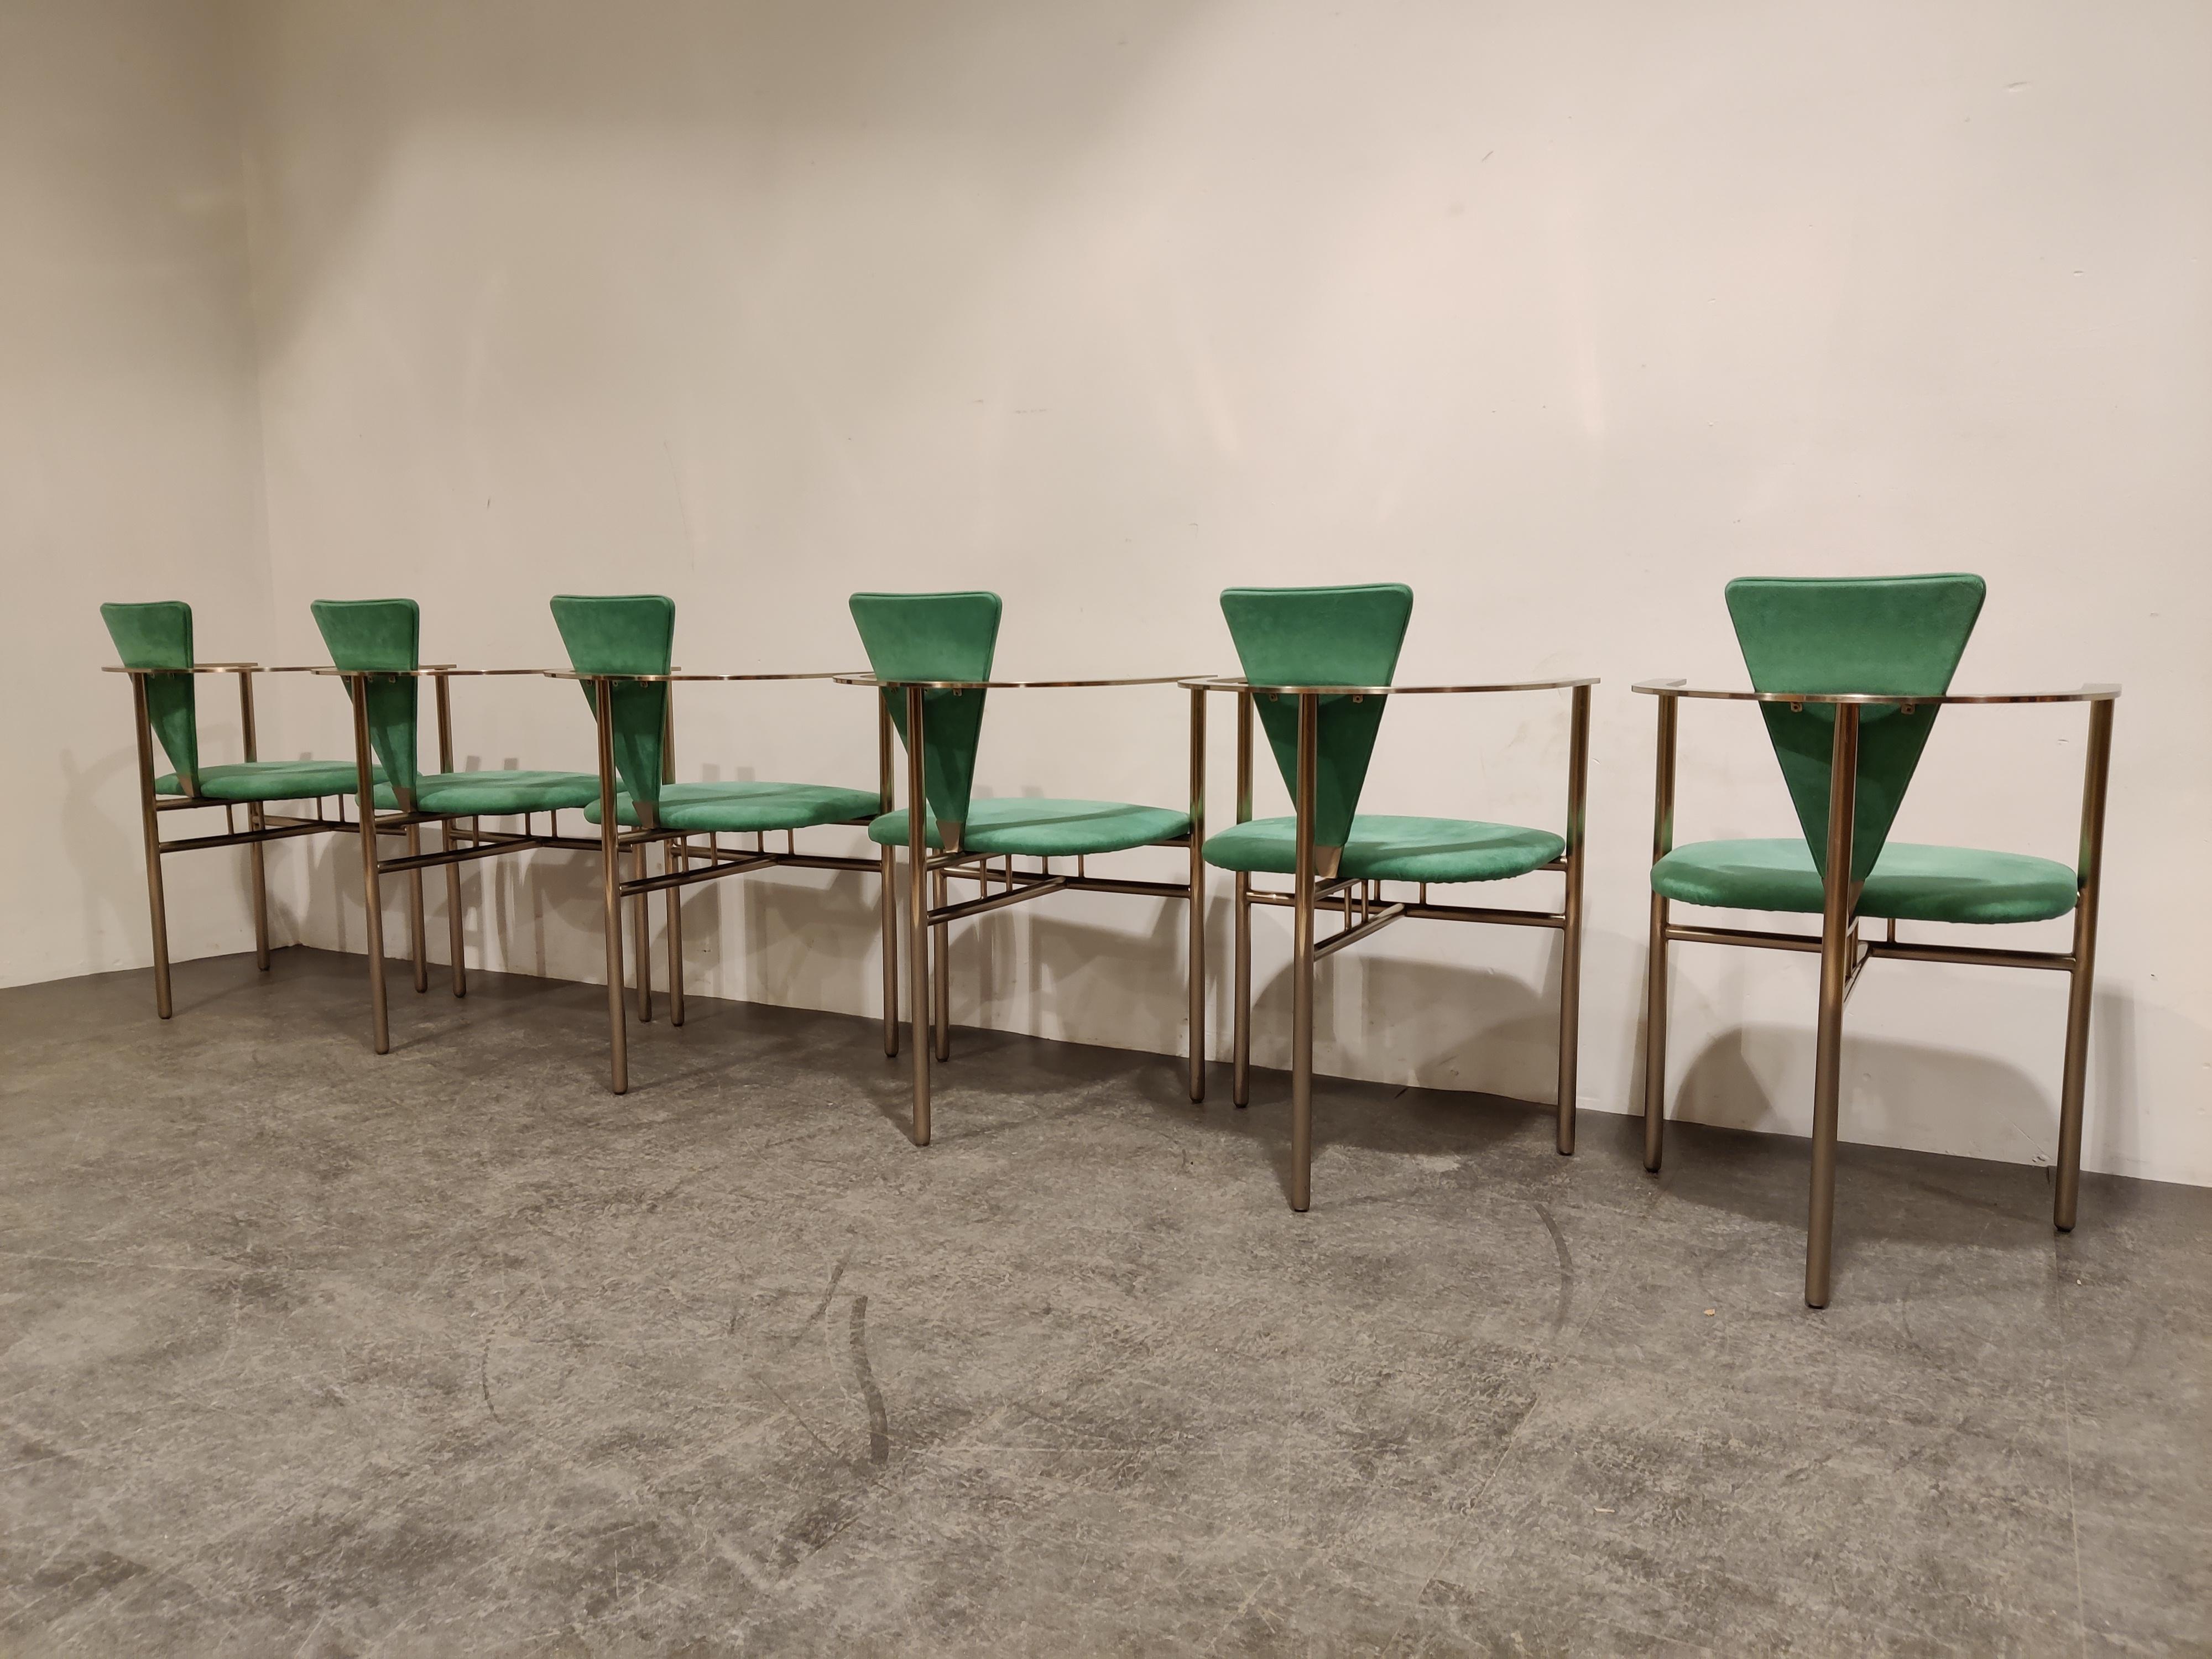 Set of six elegant dining room chairs manufactured by Belgochrom.

Nicely designed brushed steel tripod frames with elegant legs. Upholstered in green alcantara.

Belgochrom used to produce high end furniture and was the higher price-range